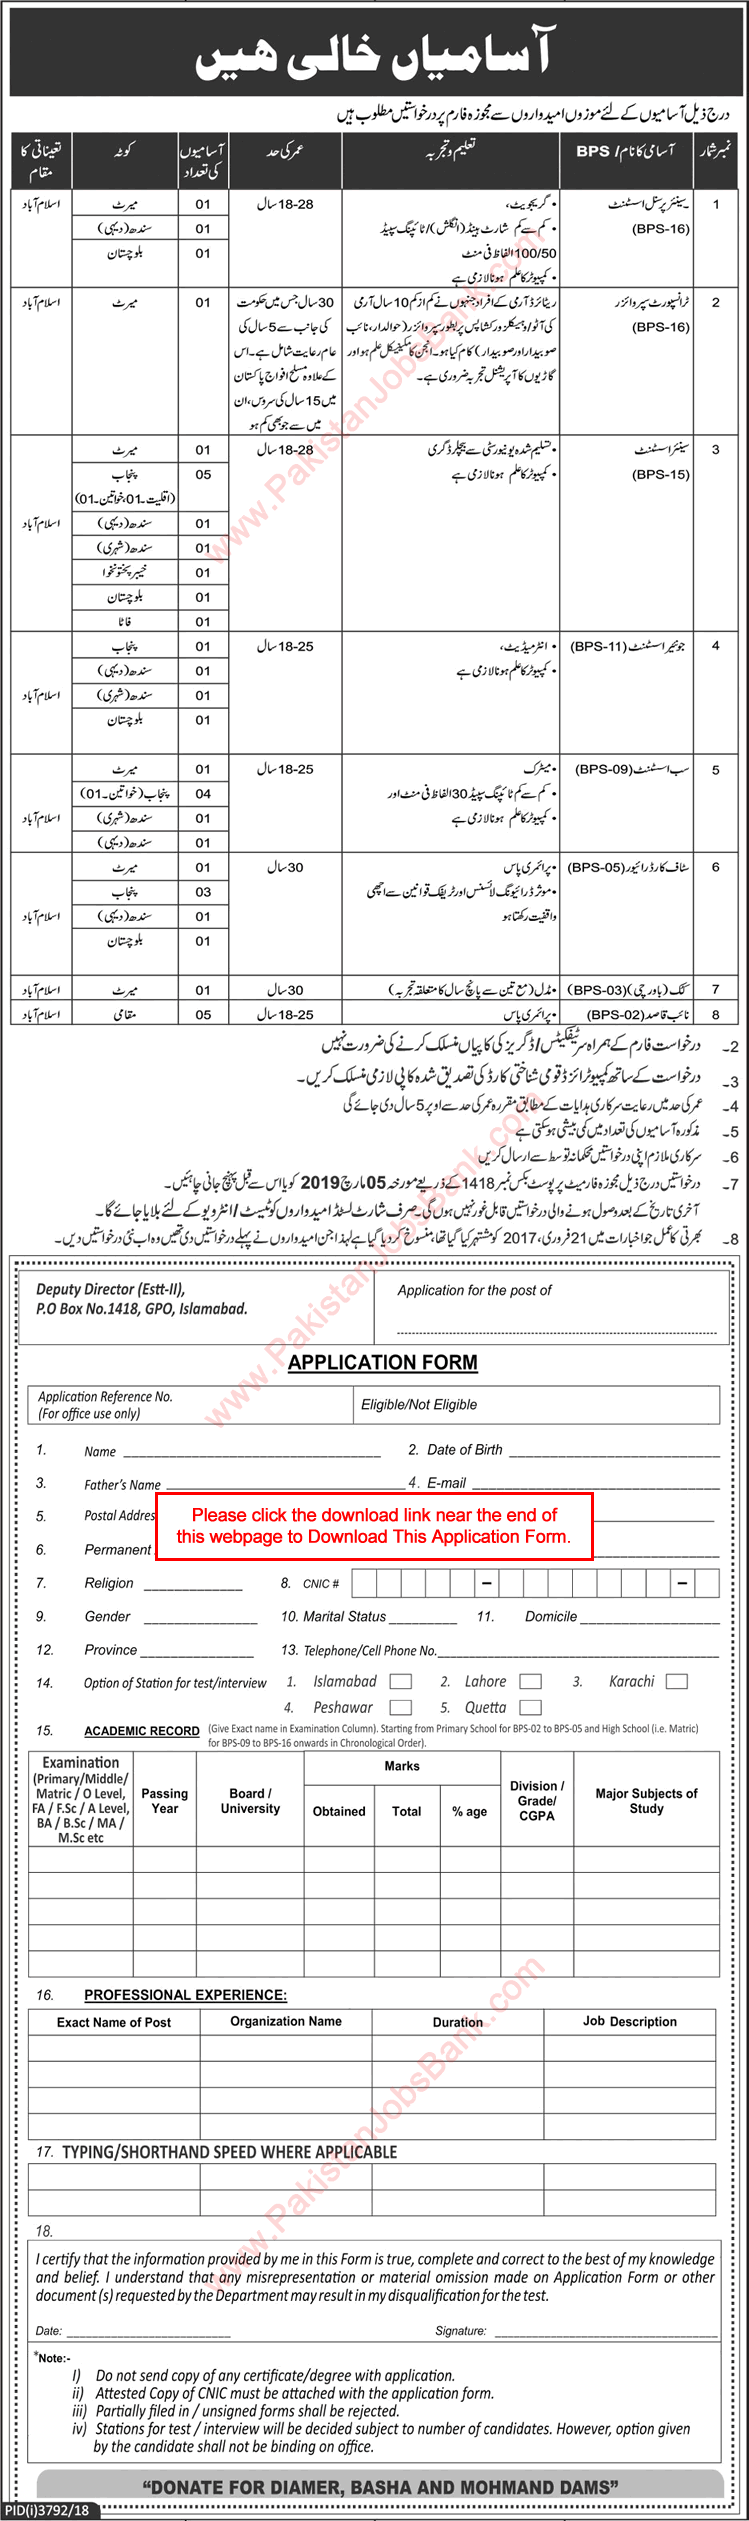 PO Box 1418 GPO Islamabad Jobs 2019 February Application Form Election Commission of Pakistan ECP Latest